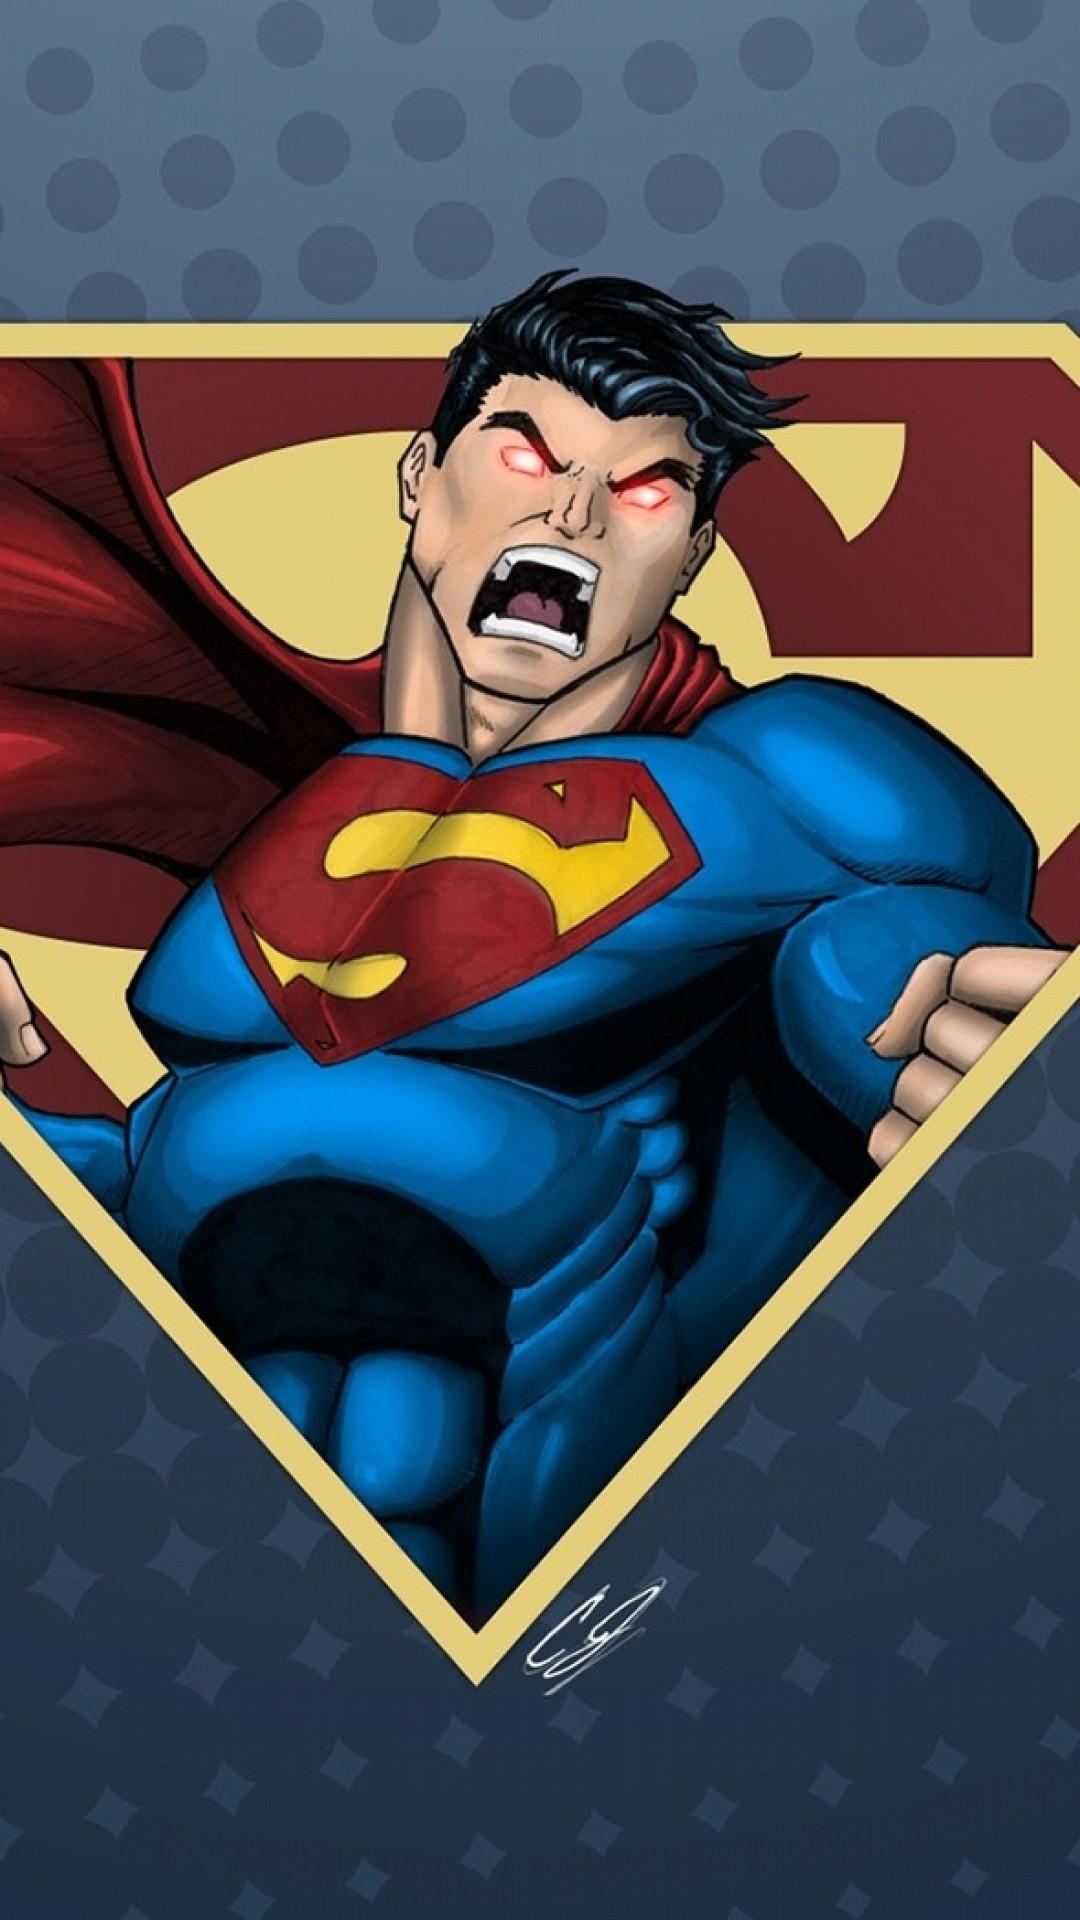 1080x1920 Superman Iphone Wallpapers Amazing HD Apple Backgrounds